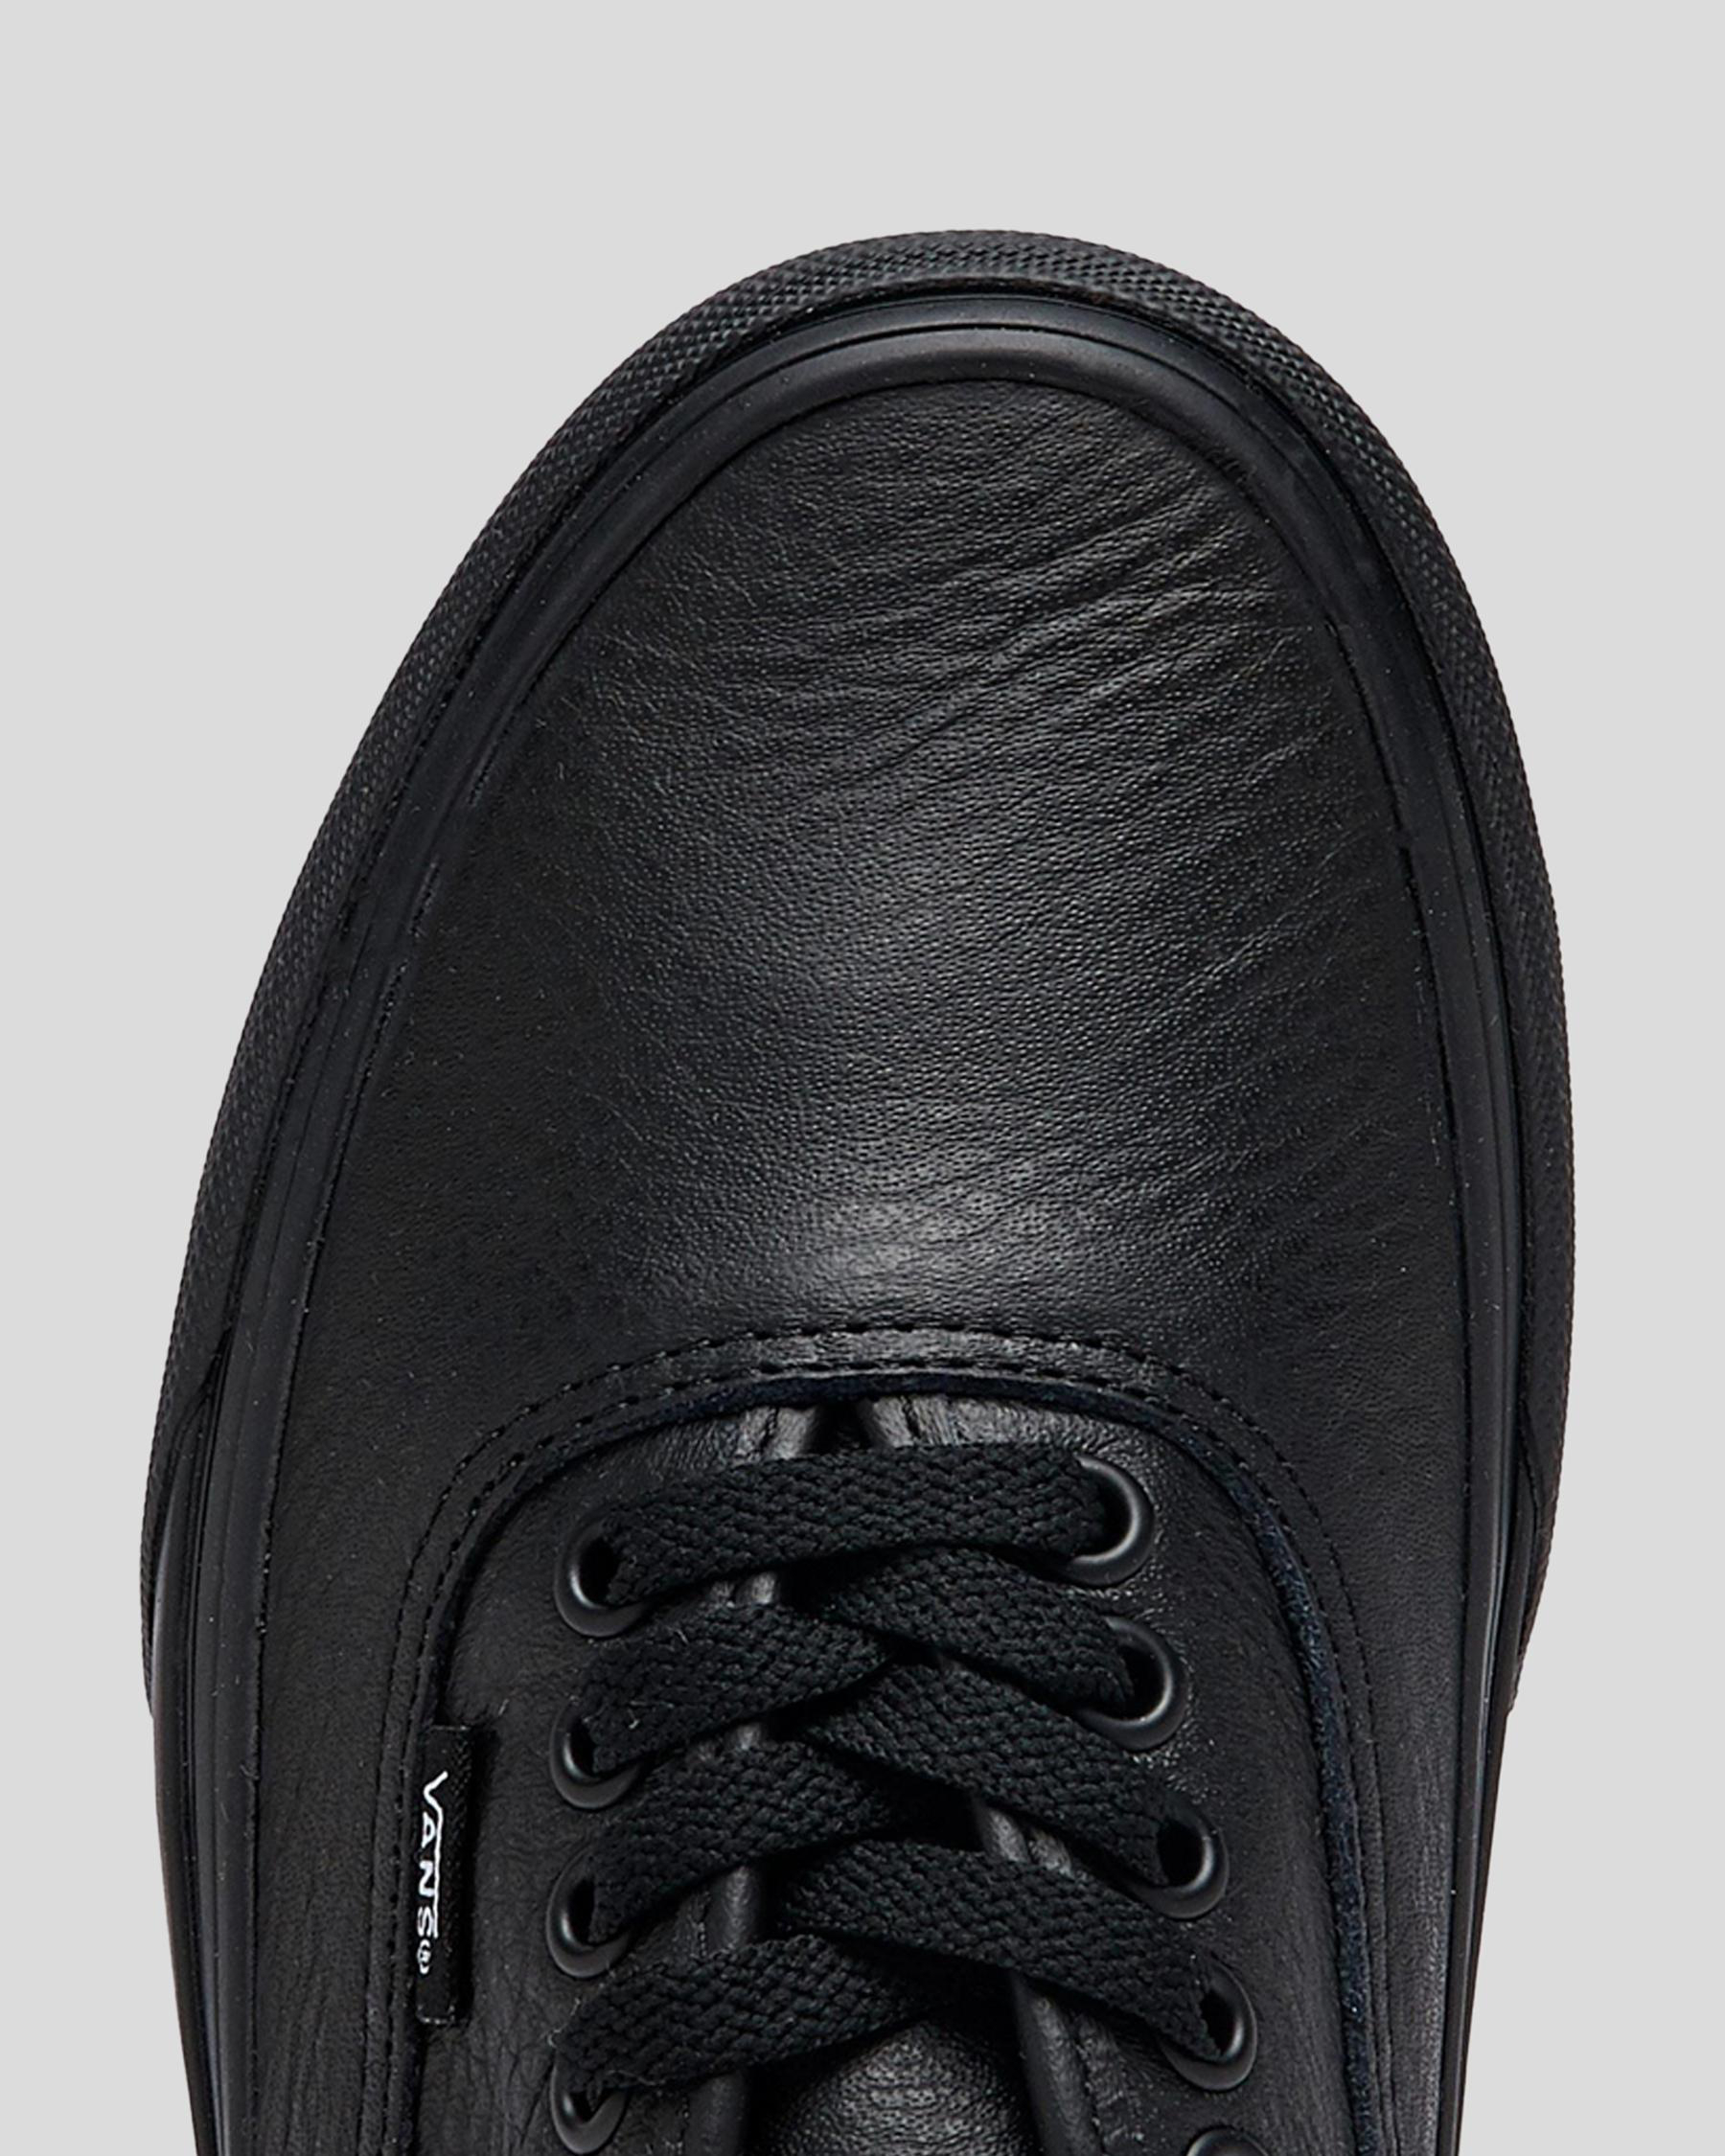 Vans Womens Authentic Shoes In Black/black - Fast Shipping & Easy ...